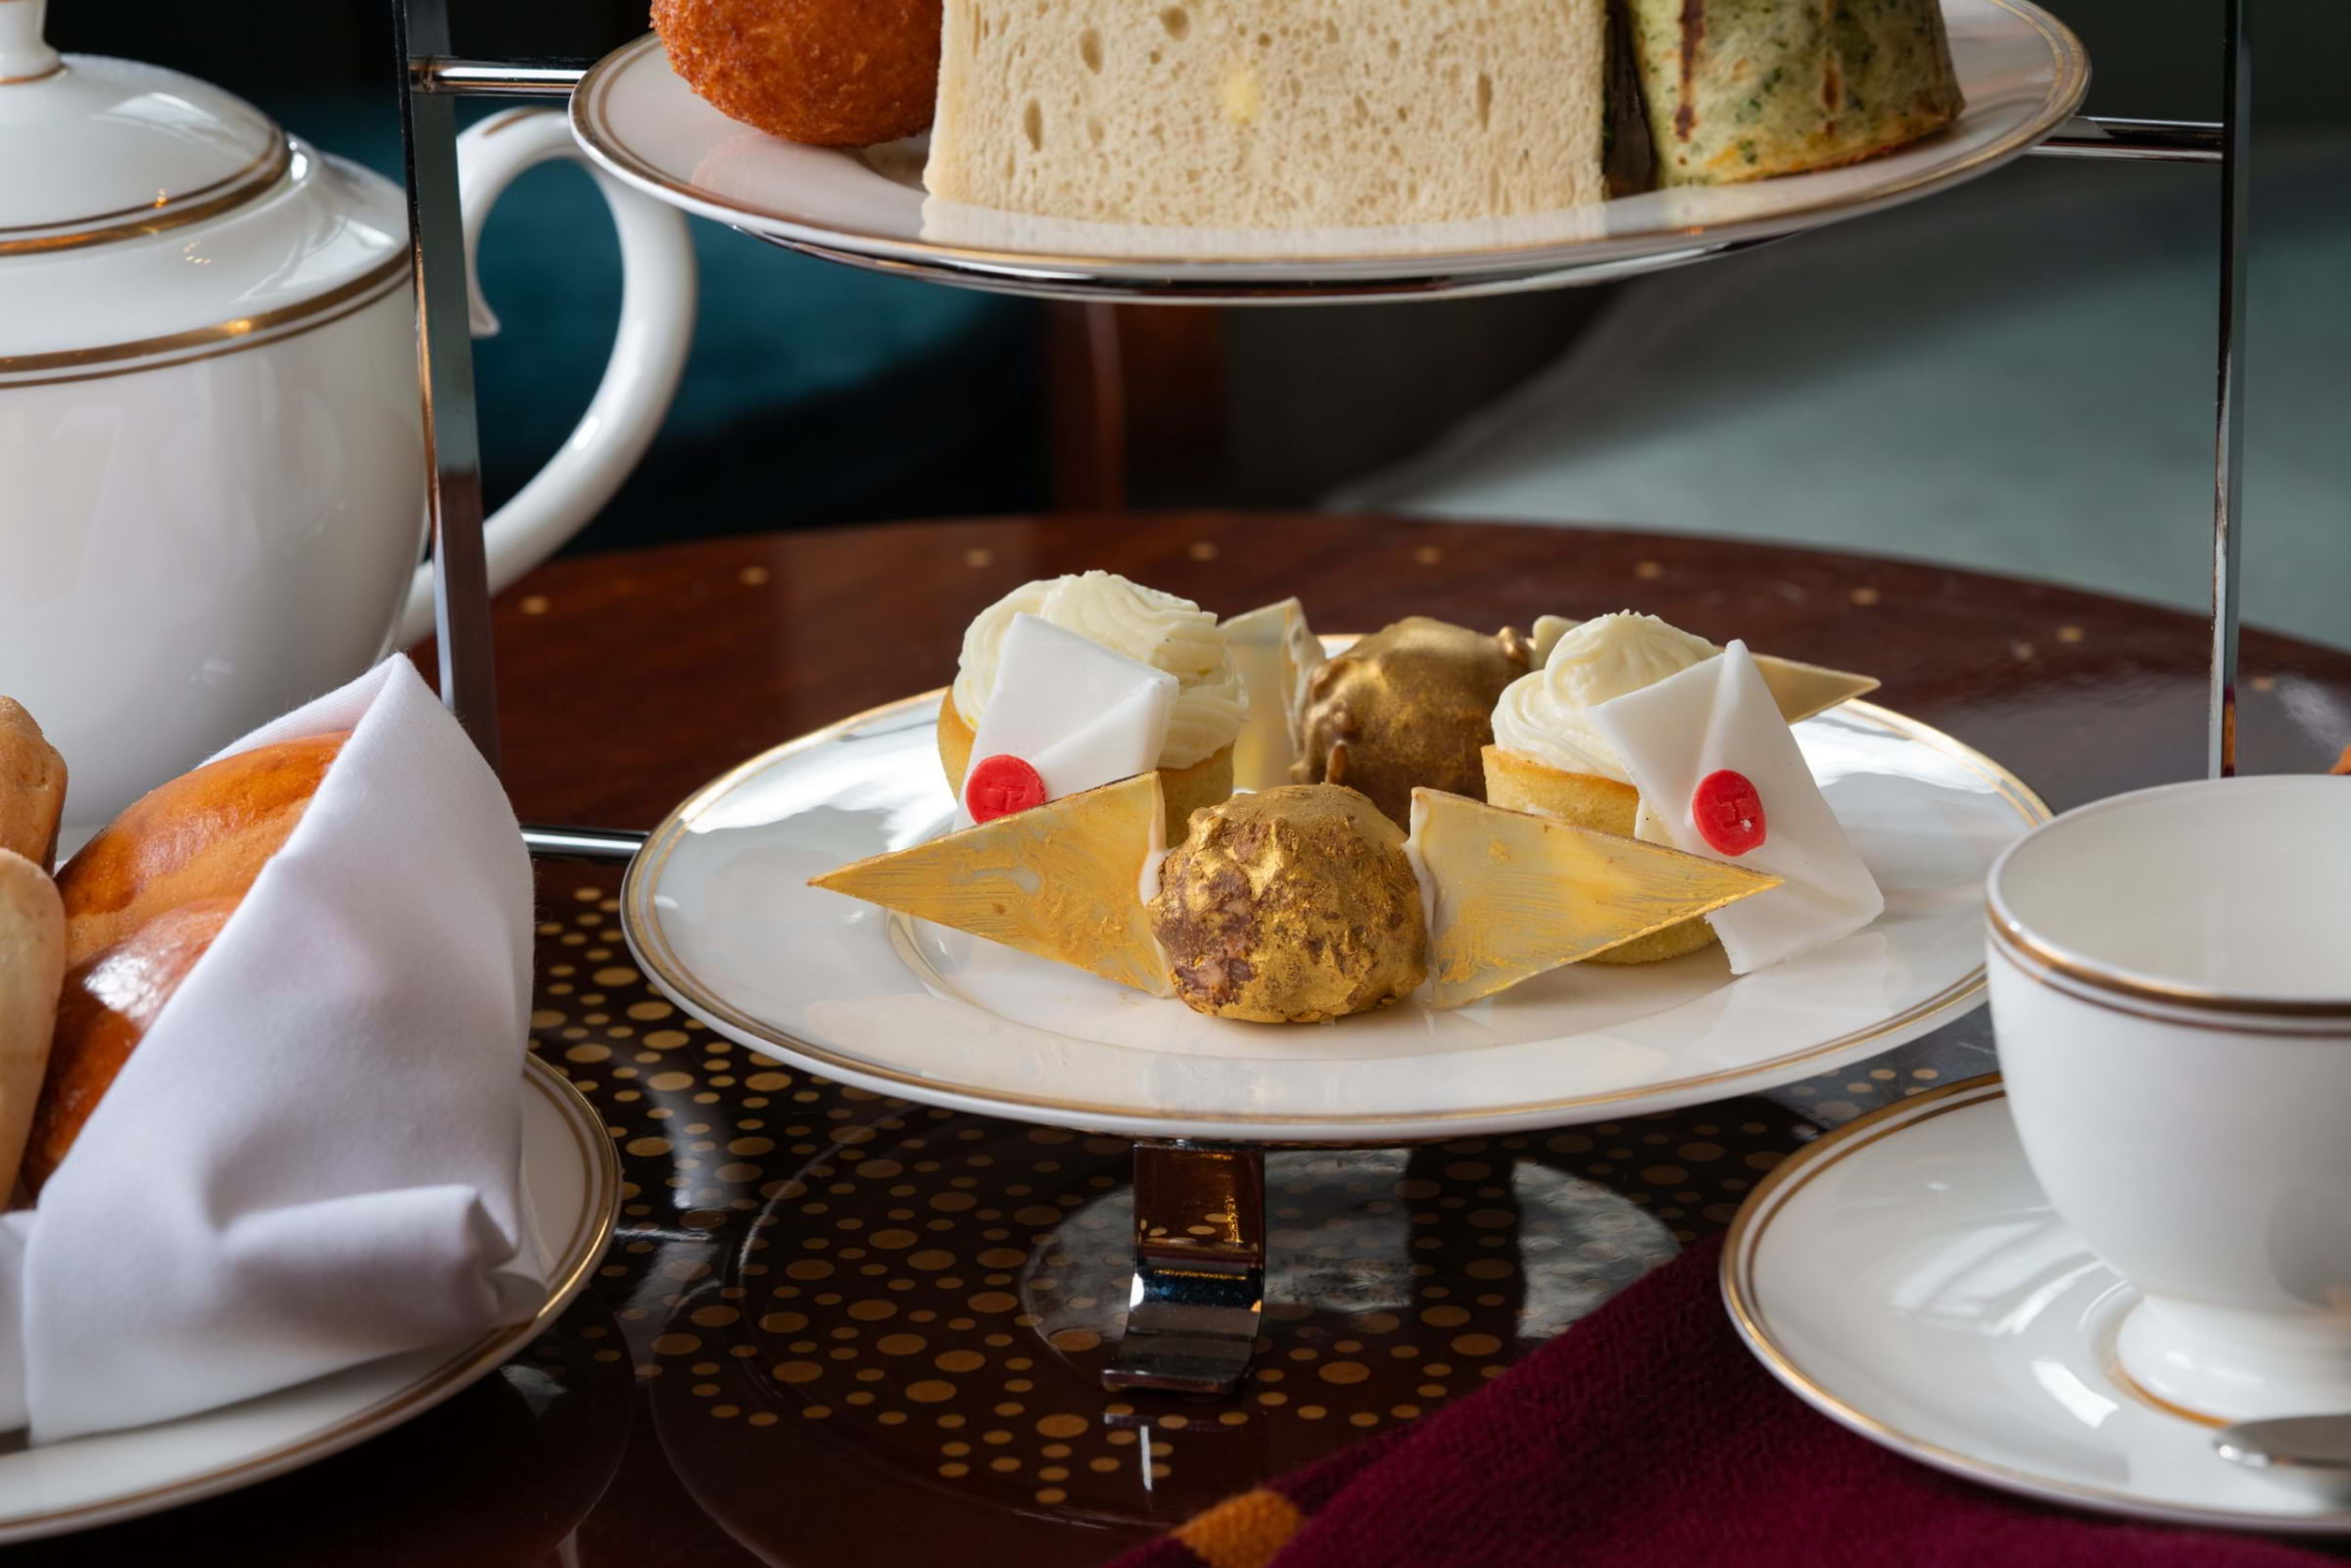 Accio afternoon tea! There's a new Harry Potter-themed experience in London